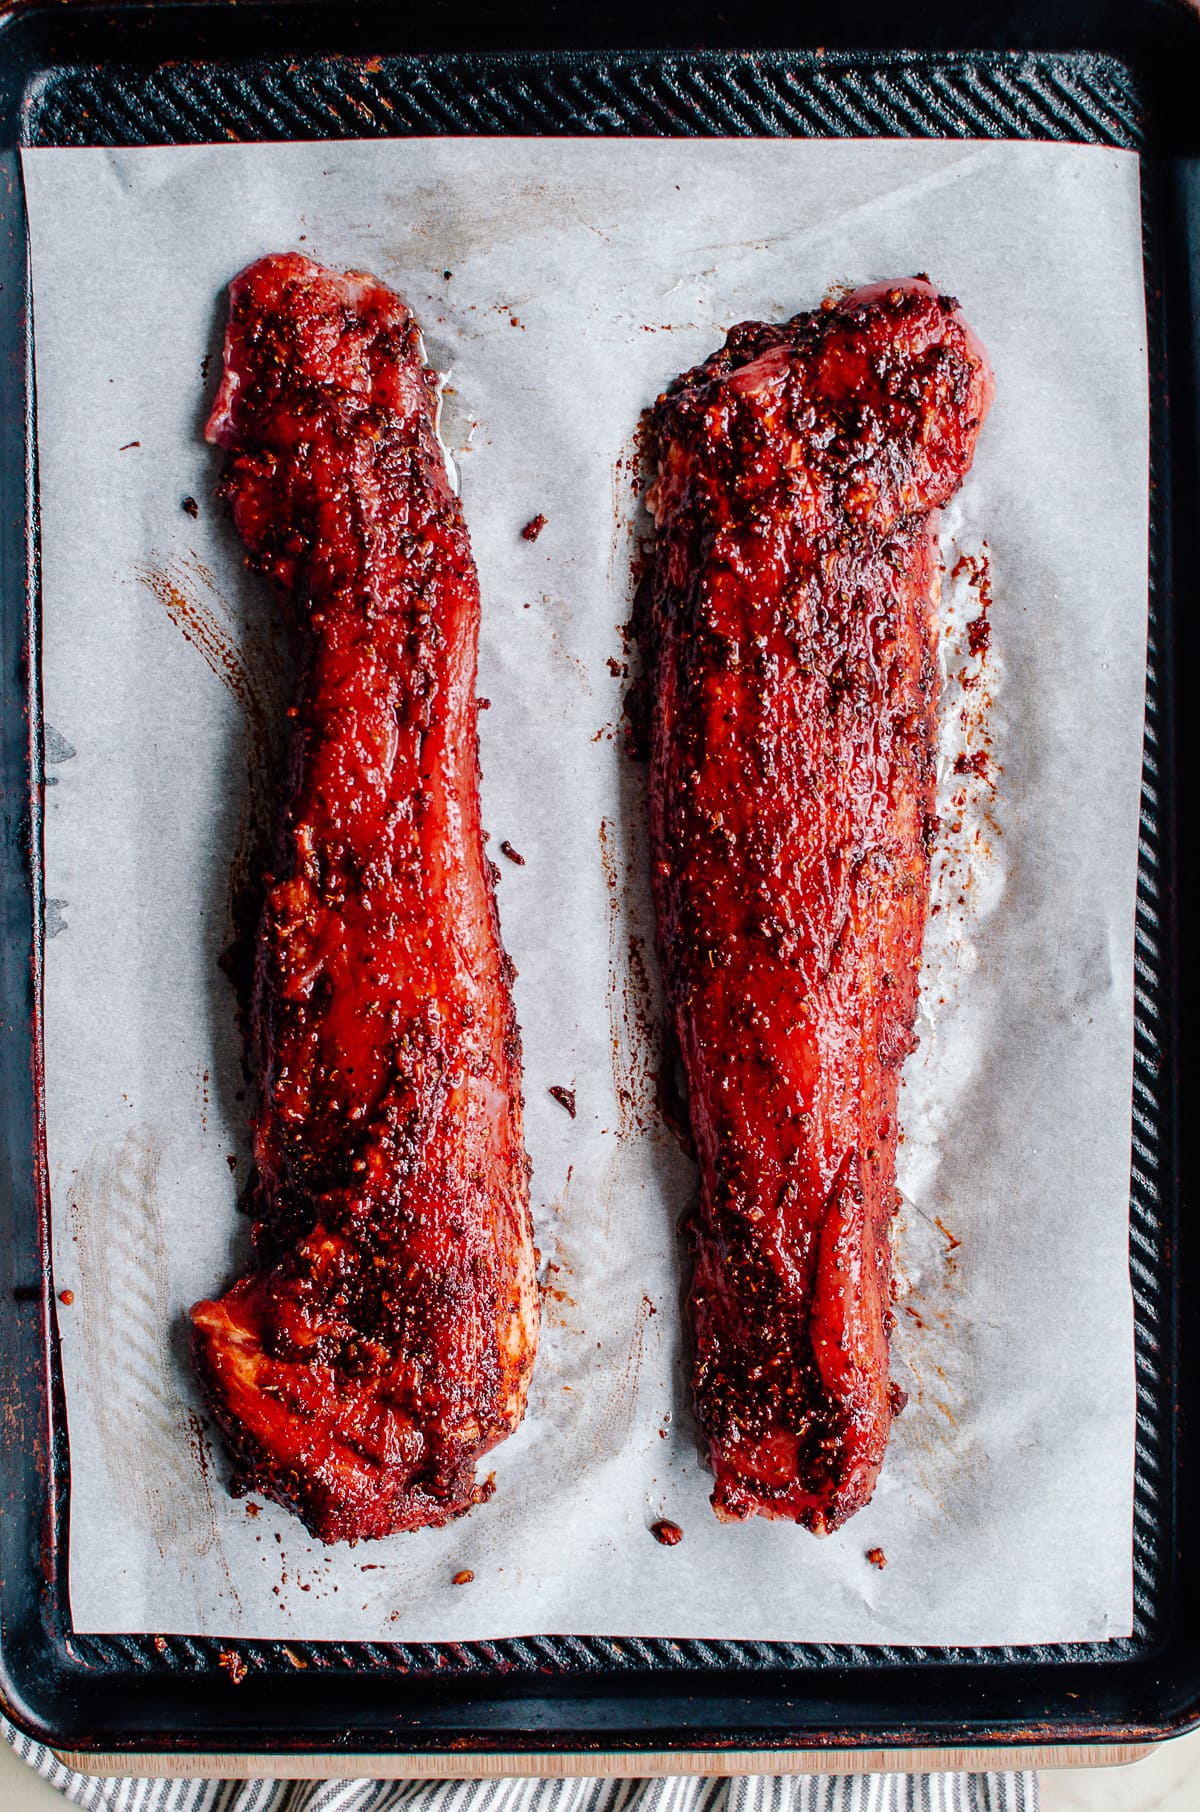 Two chile rubbed pork tenderloins on a baking sheet lined with parchment paper.